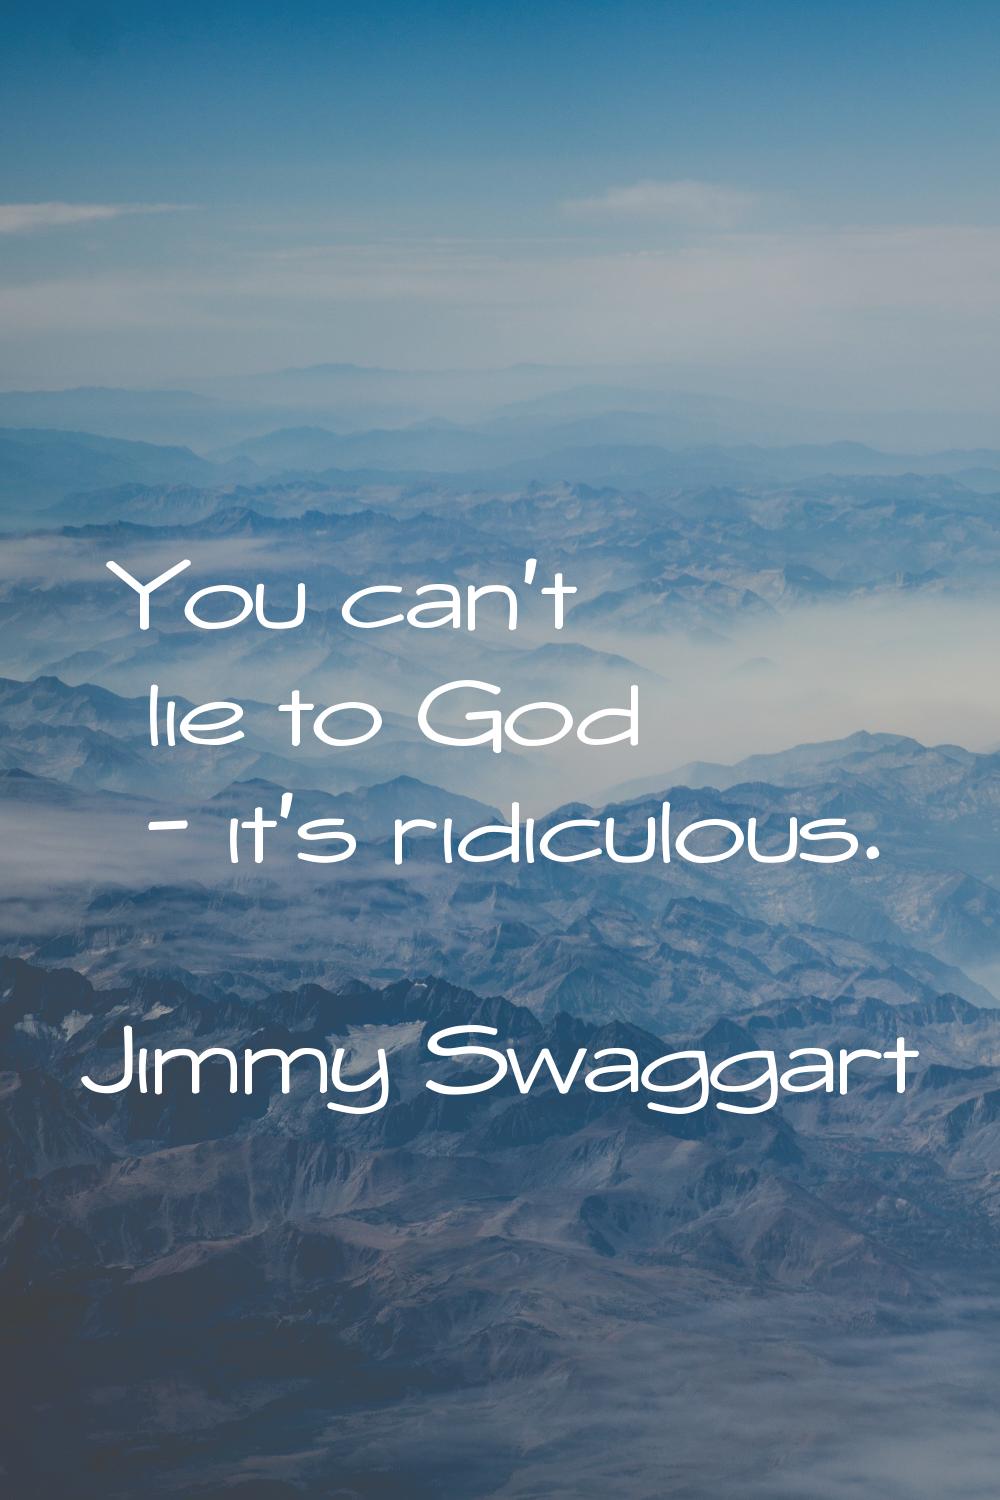 You can't lie to God - it's ridiculous.